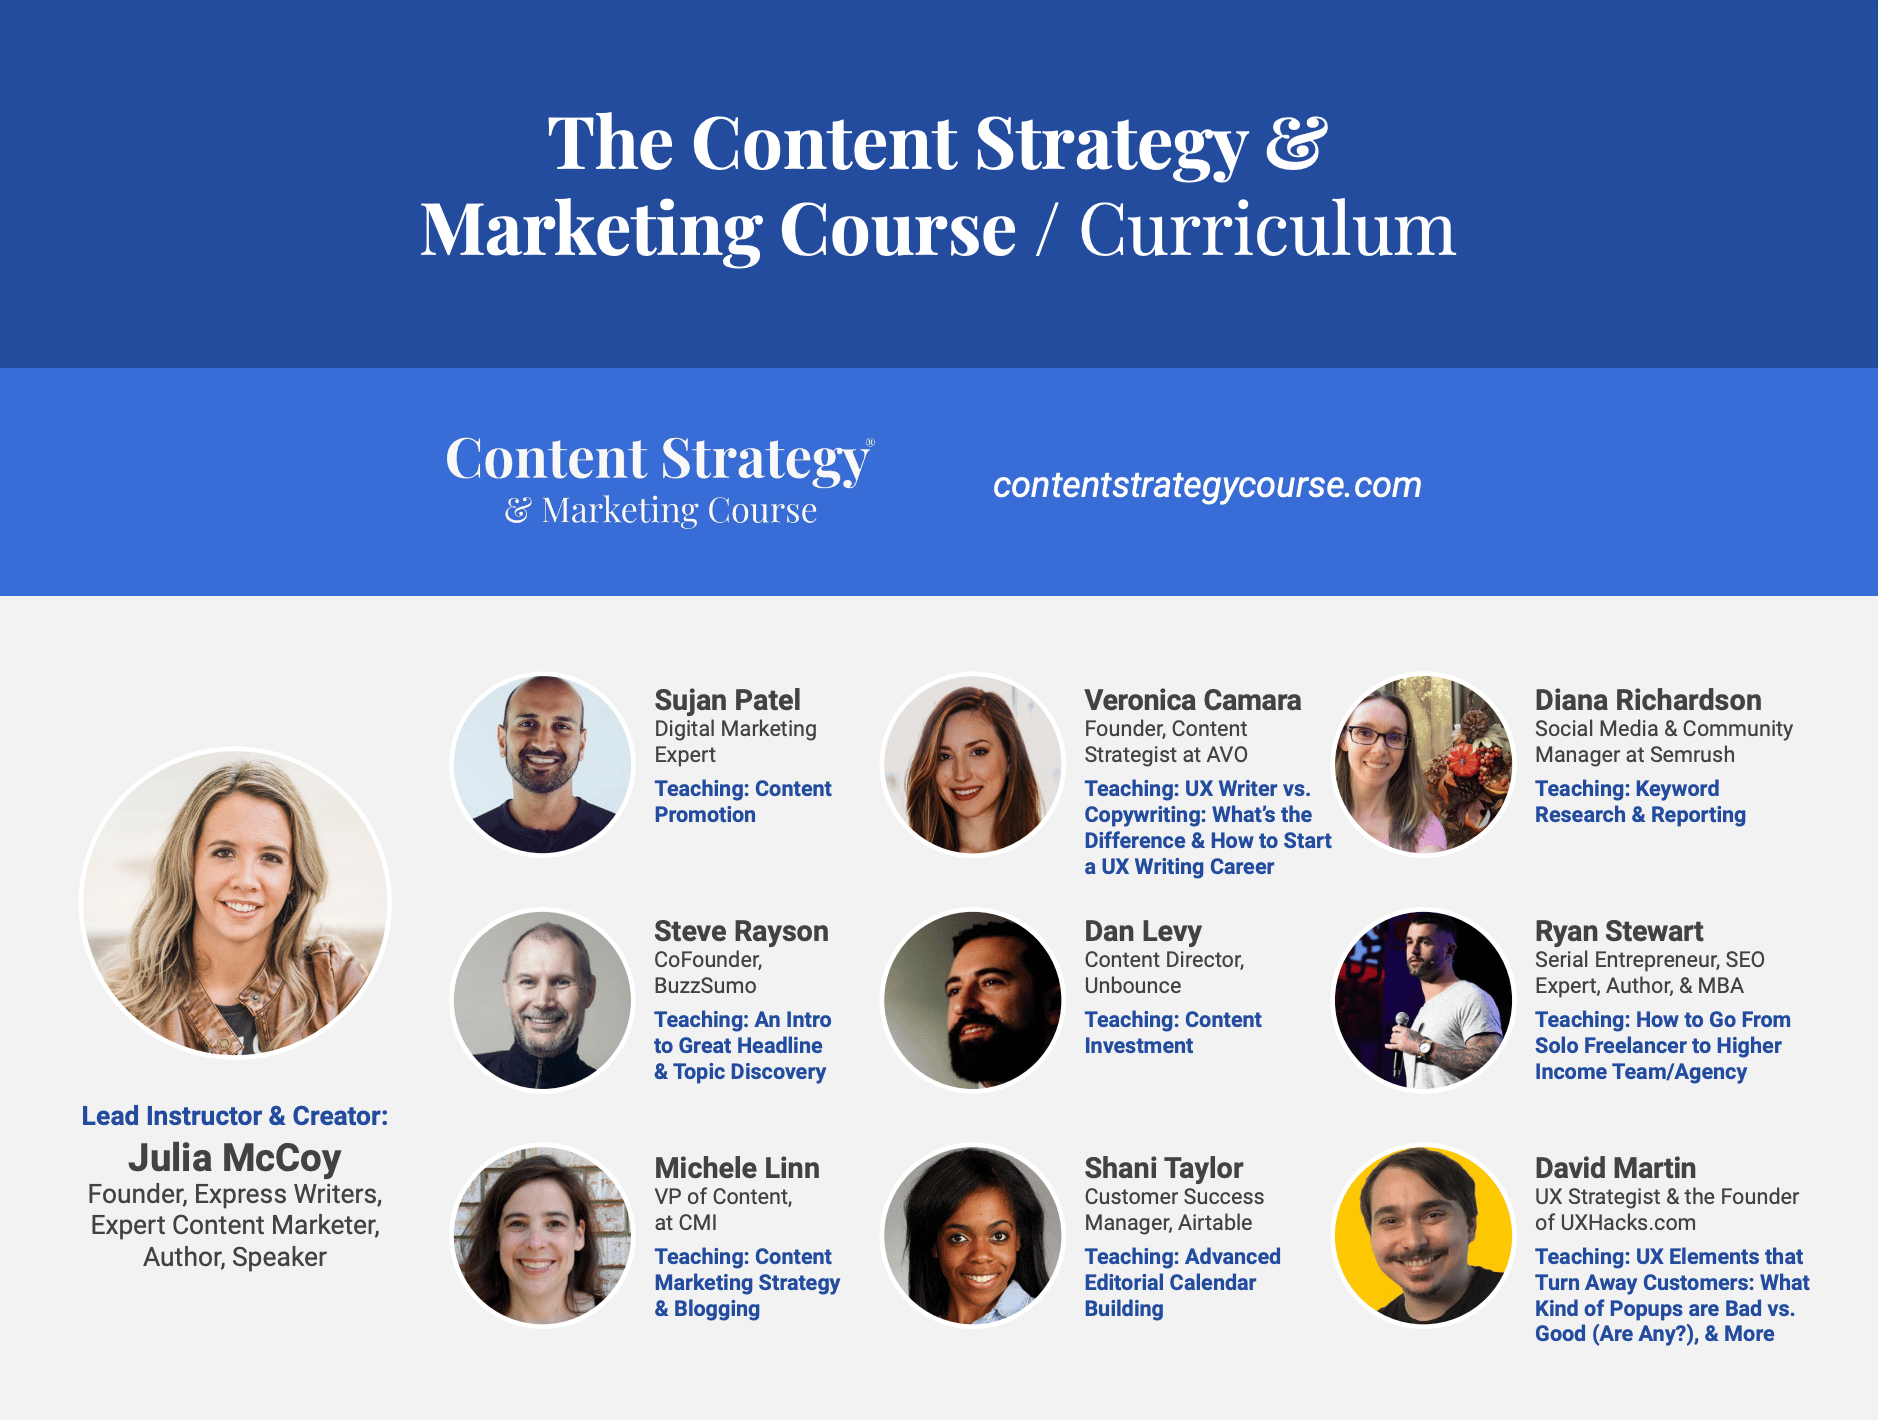 content strategy and marketing course experts